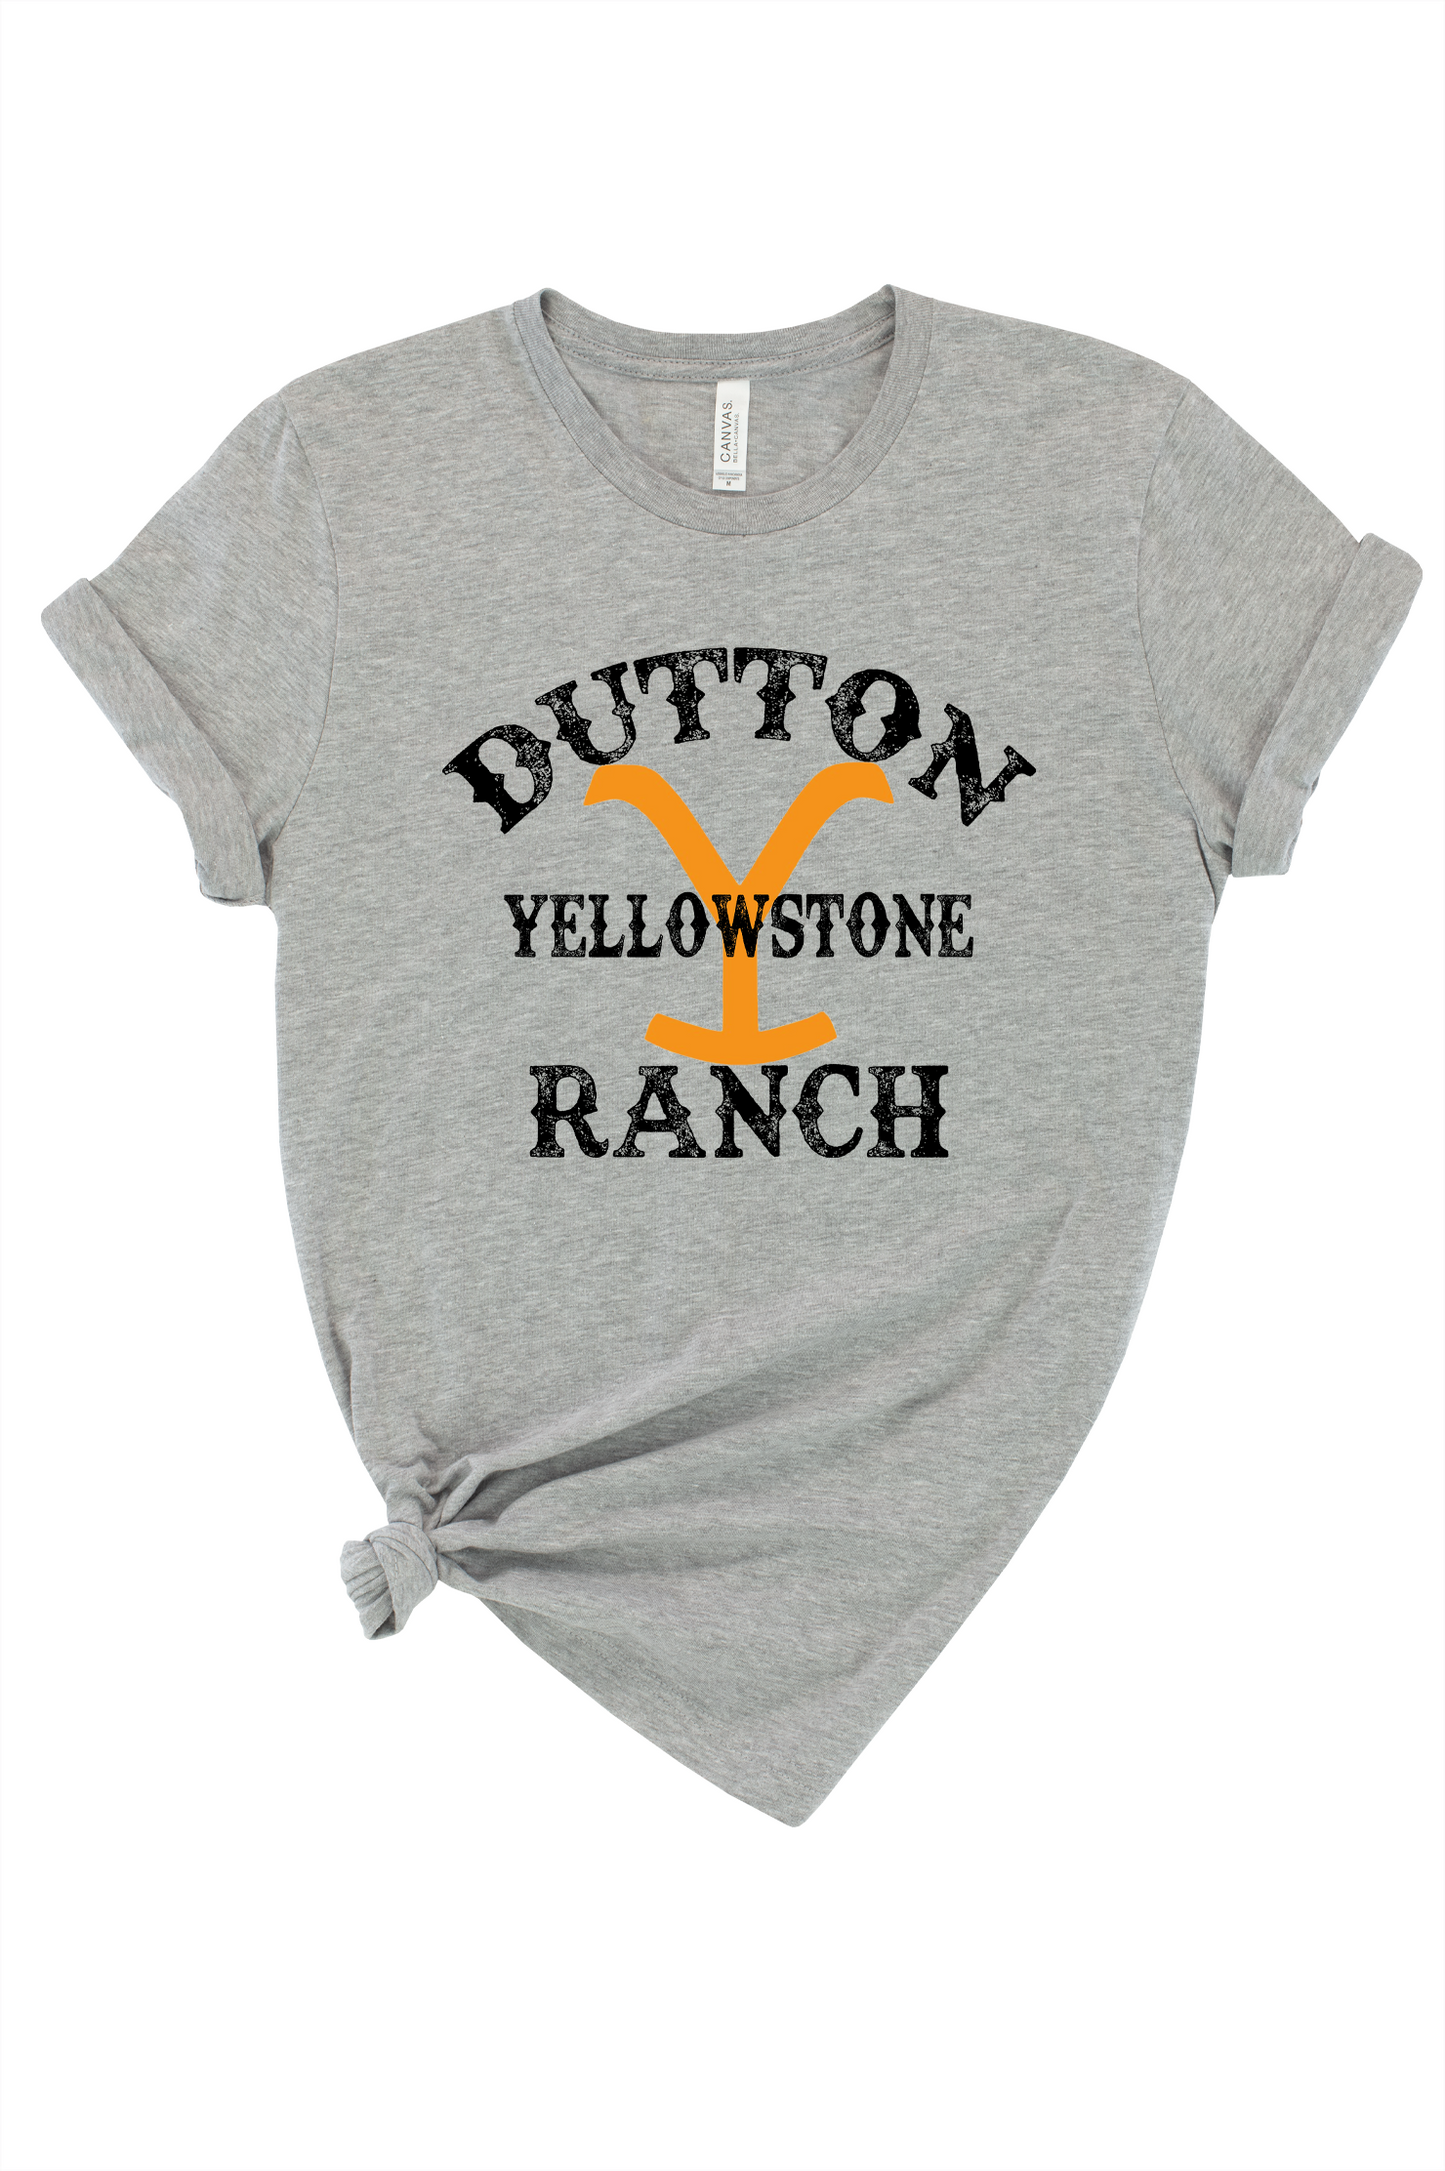 Dutton Ranch Yellowstone Graphic Tee